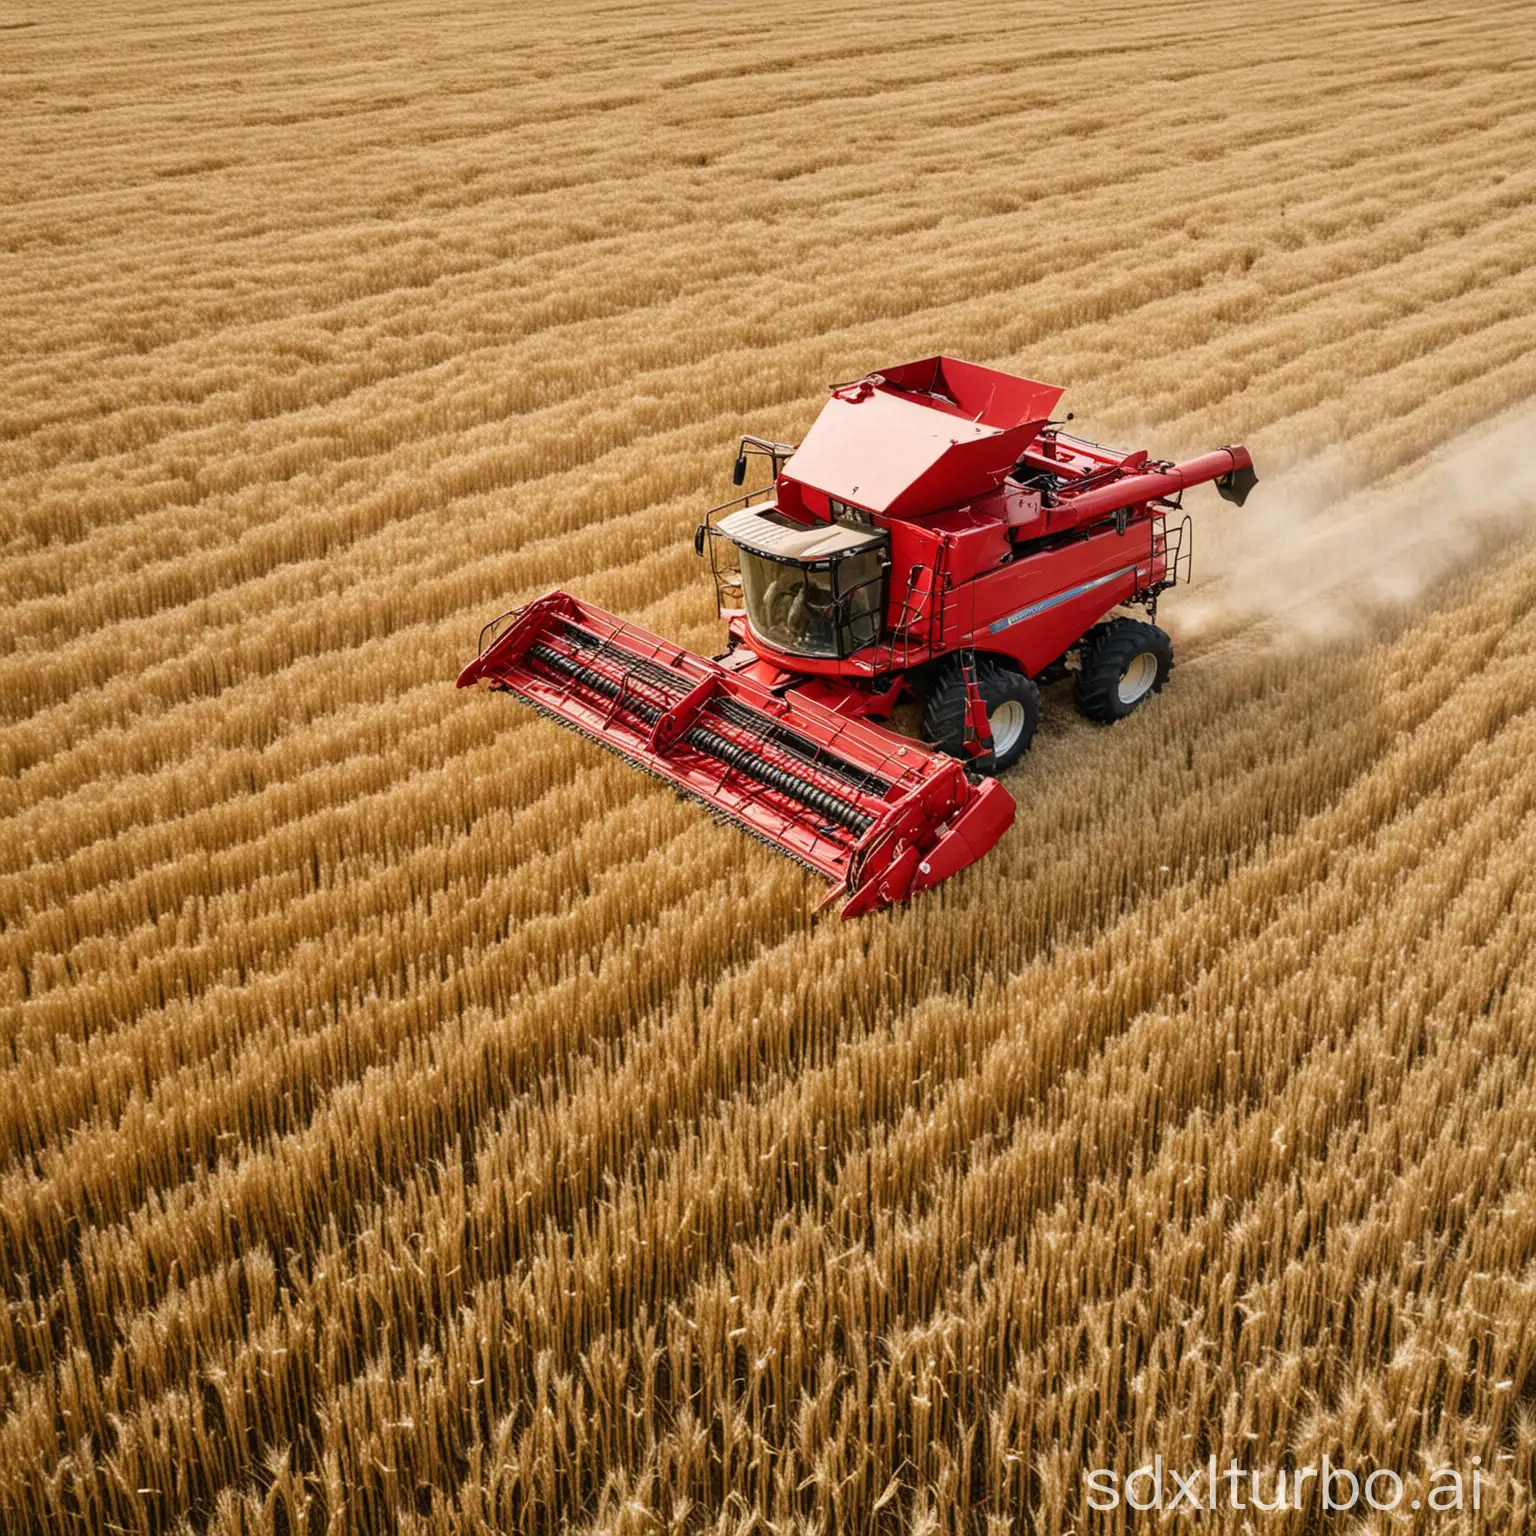 Powerful-Red-Combine-Harvester-in-Wheat-Field